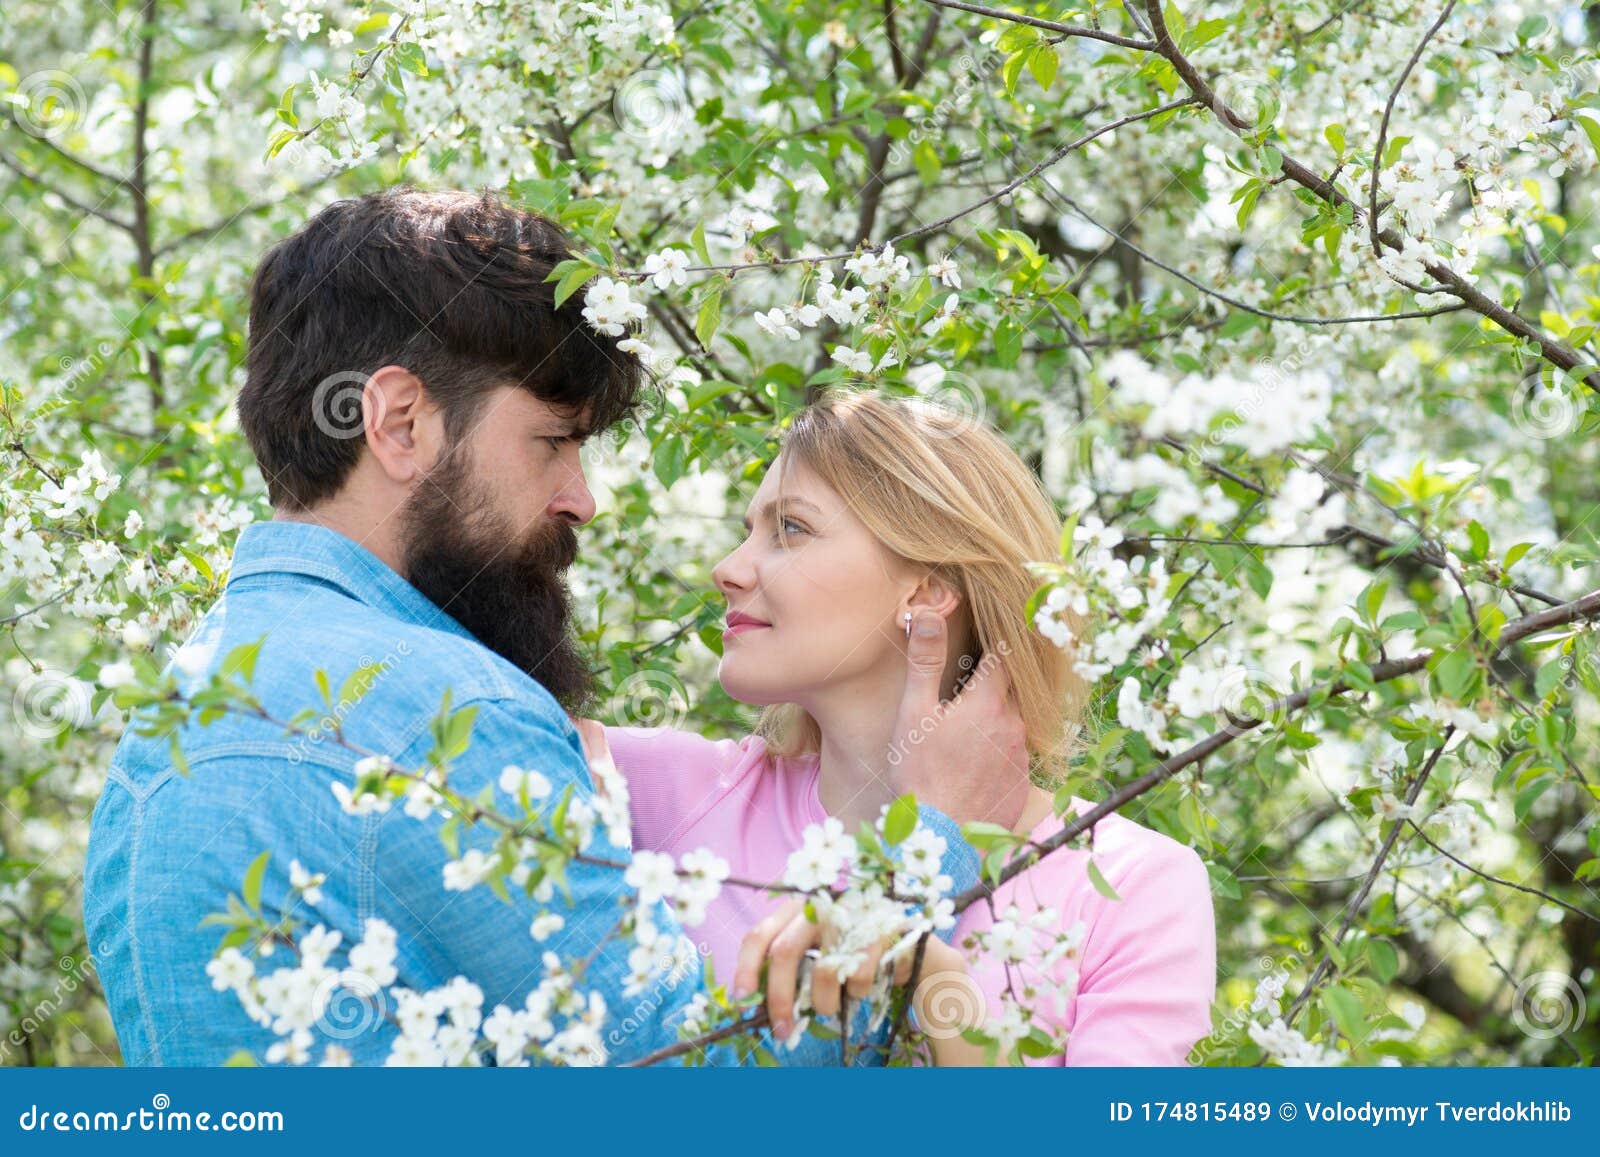 https://thumbs.dreamstime.com/z/woman-men-enjoying-perfect-relationships-spending-sprinf-vacations-young-happy-couple-near-blossom-tree-woman-man-174815489.jpg